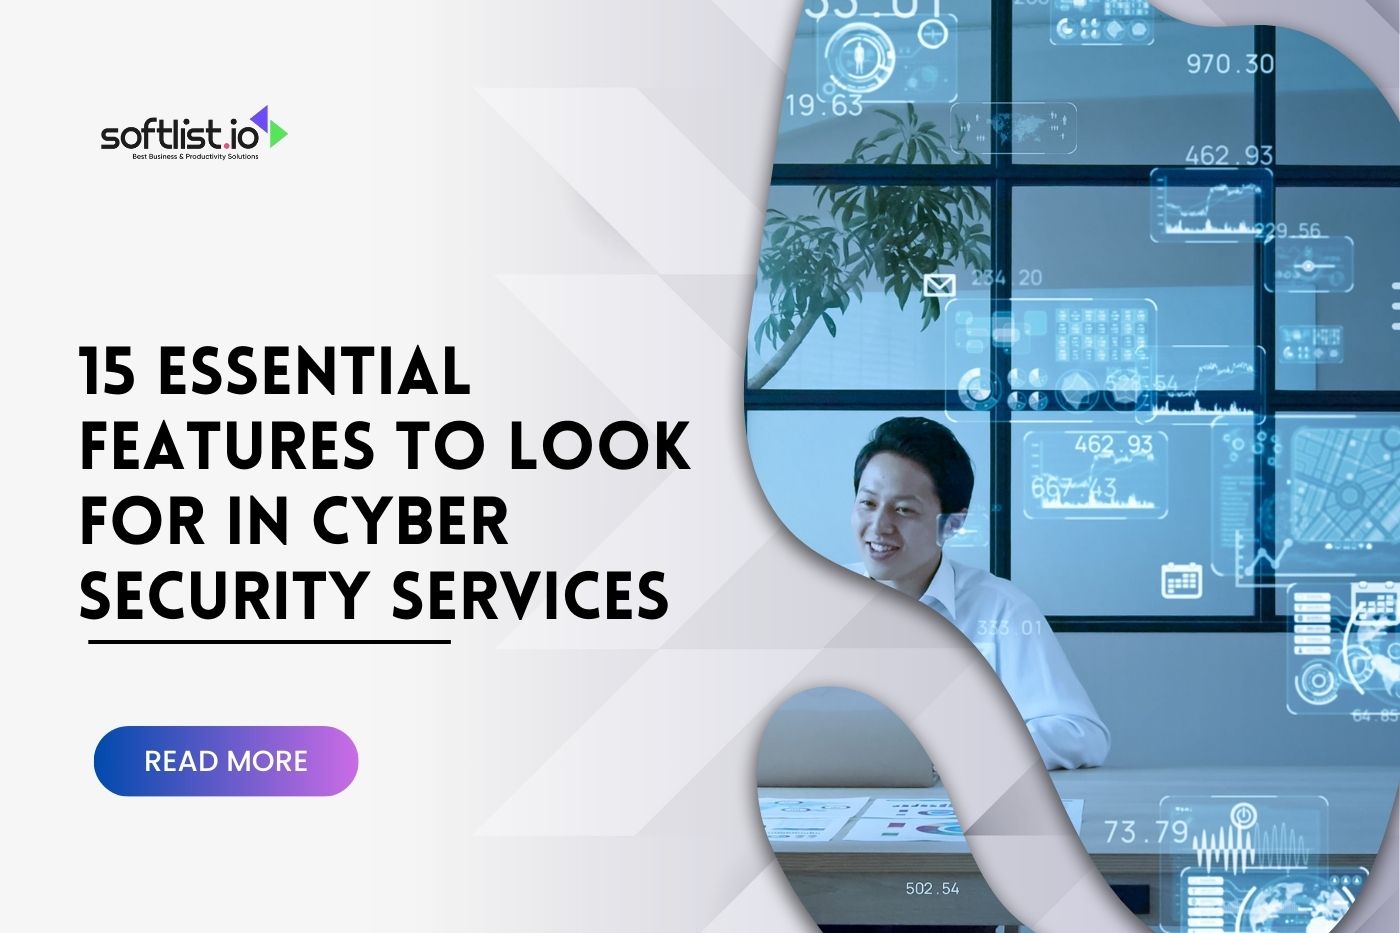 15 Essential Features to Look For in Cyber Security Services